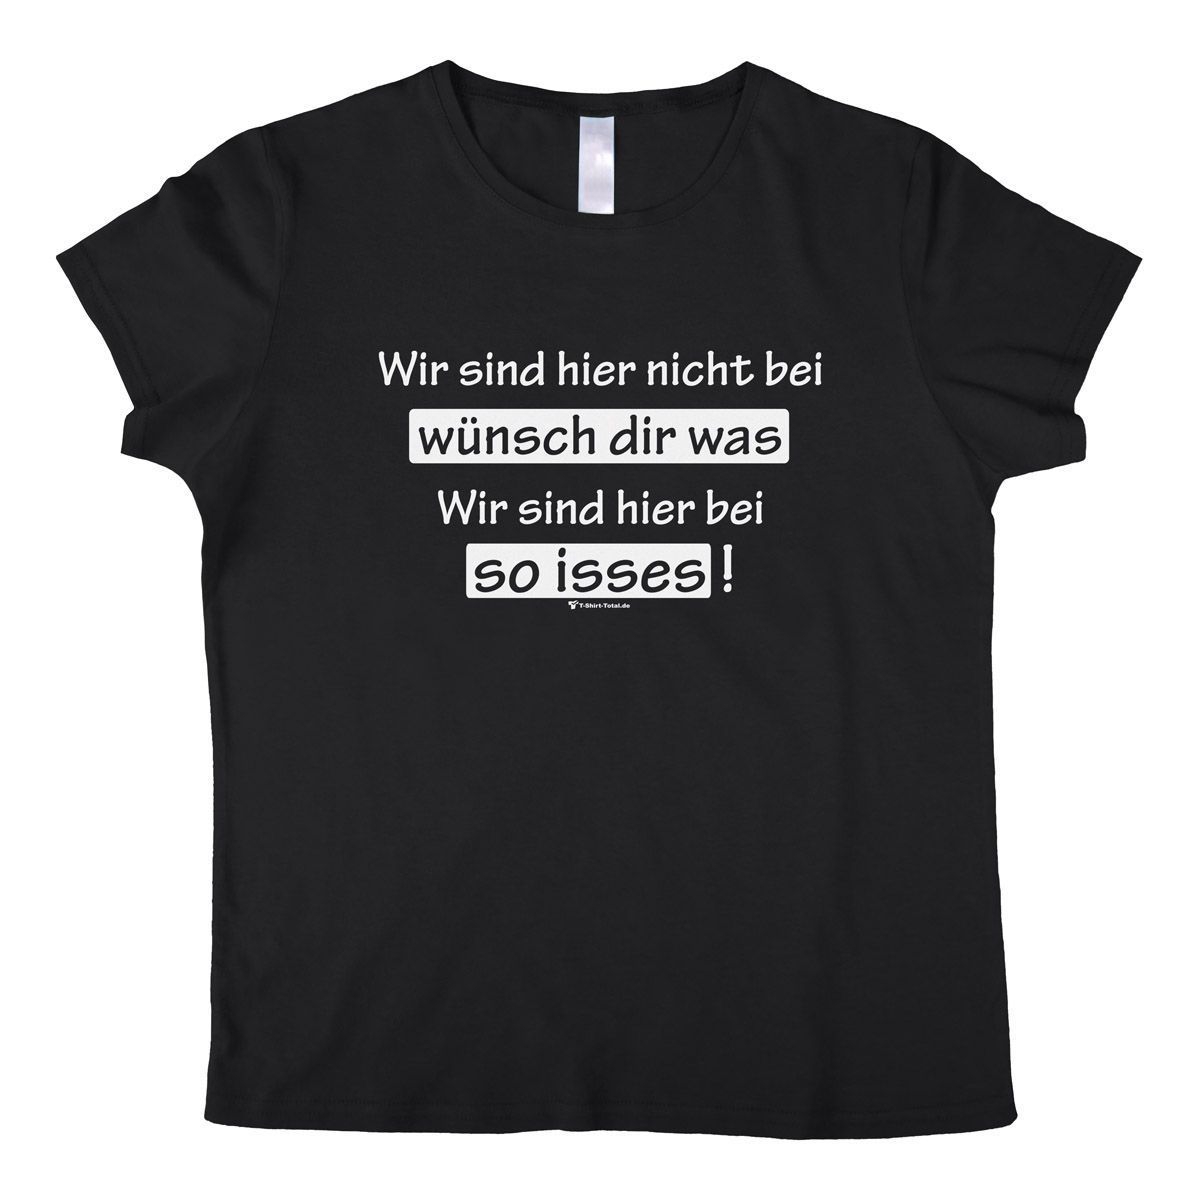 So isses Woman T-Shirt schwarz Extra Large